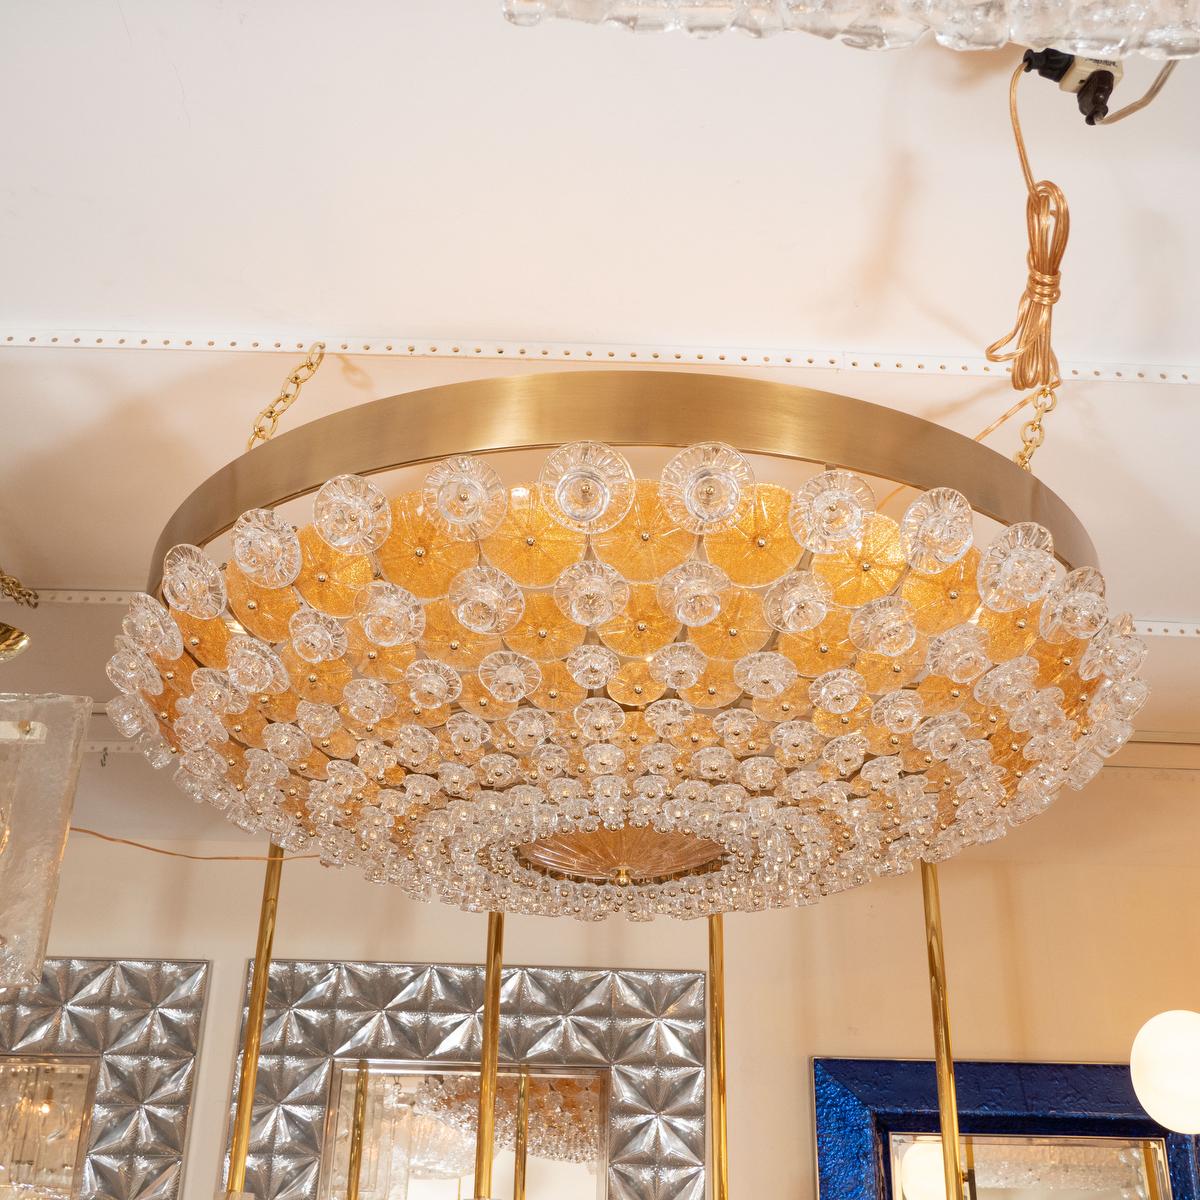 Monumental brass ceiling fixture composed of clear and amber glass flowers in the manner of Barovier.